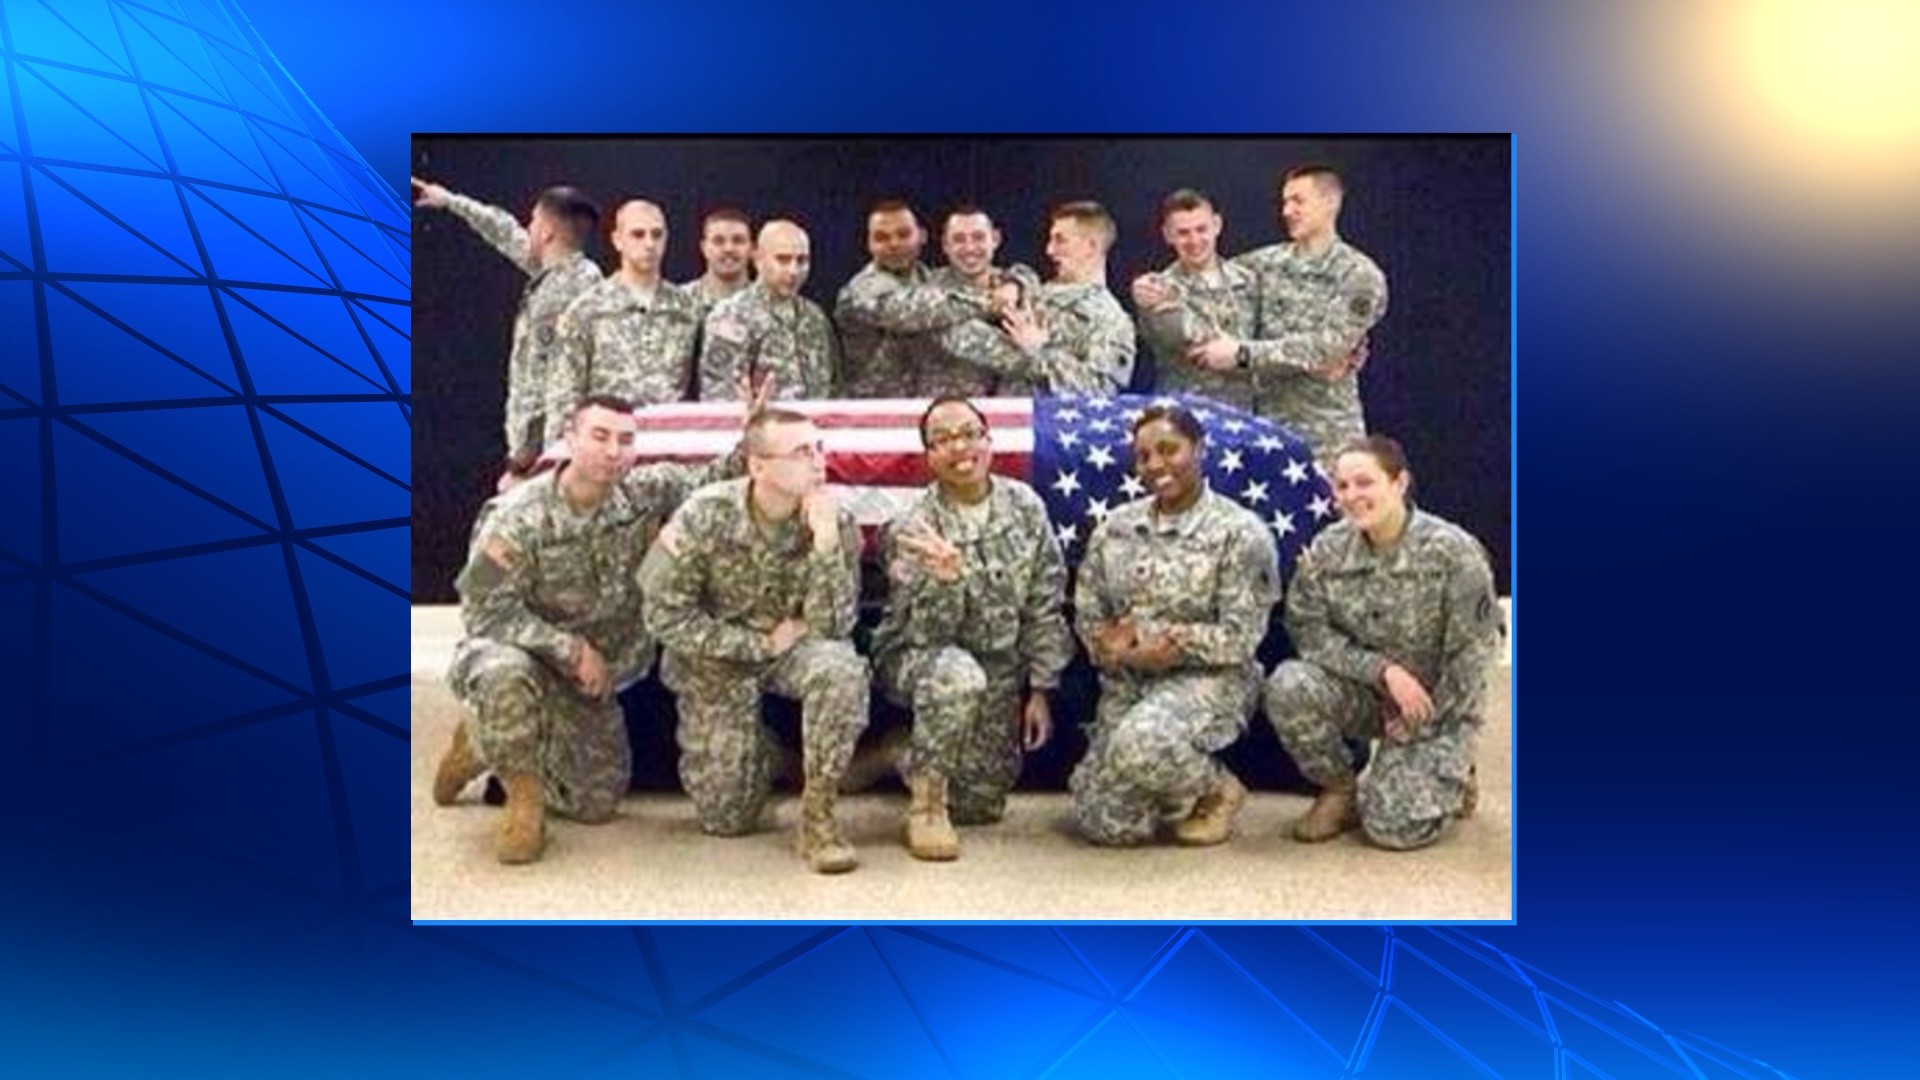 1920x1080 National Guard suspends soldier over funeral photos